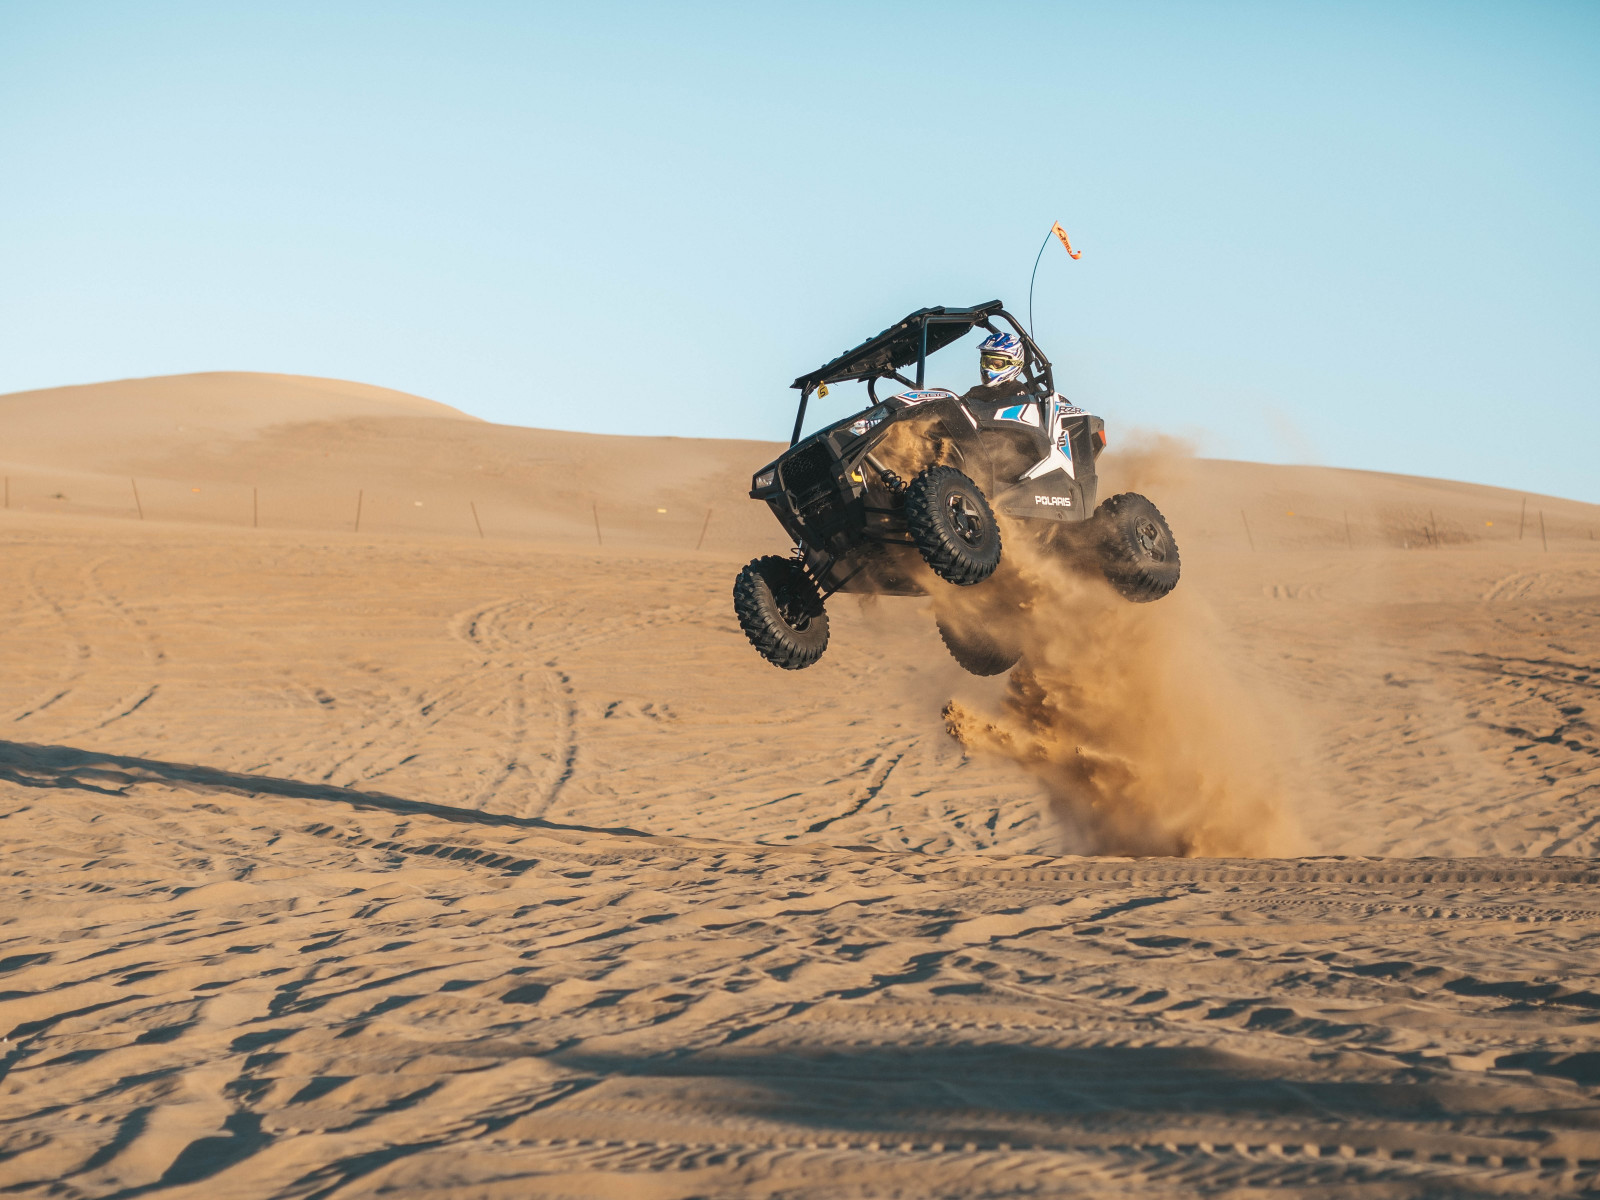 With ATV on the the sand dunes wallpaper 1600x1200